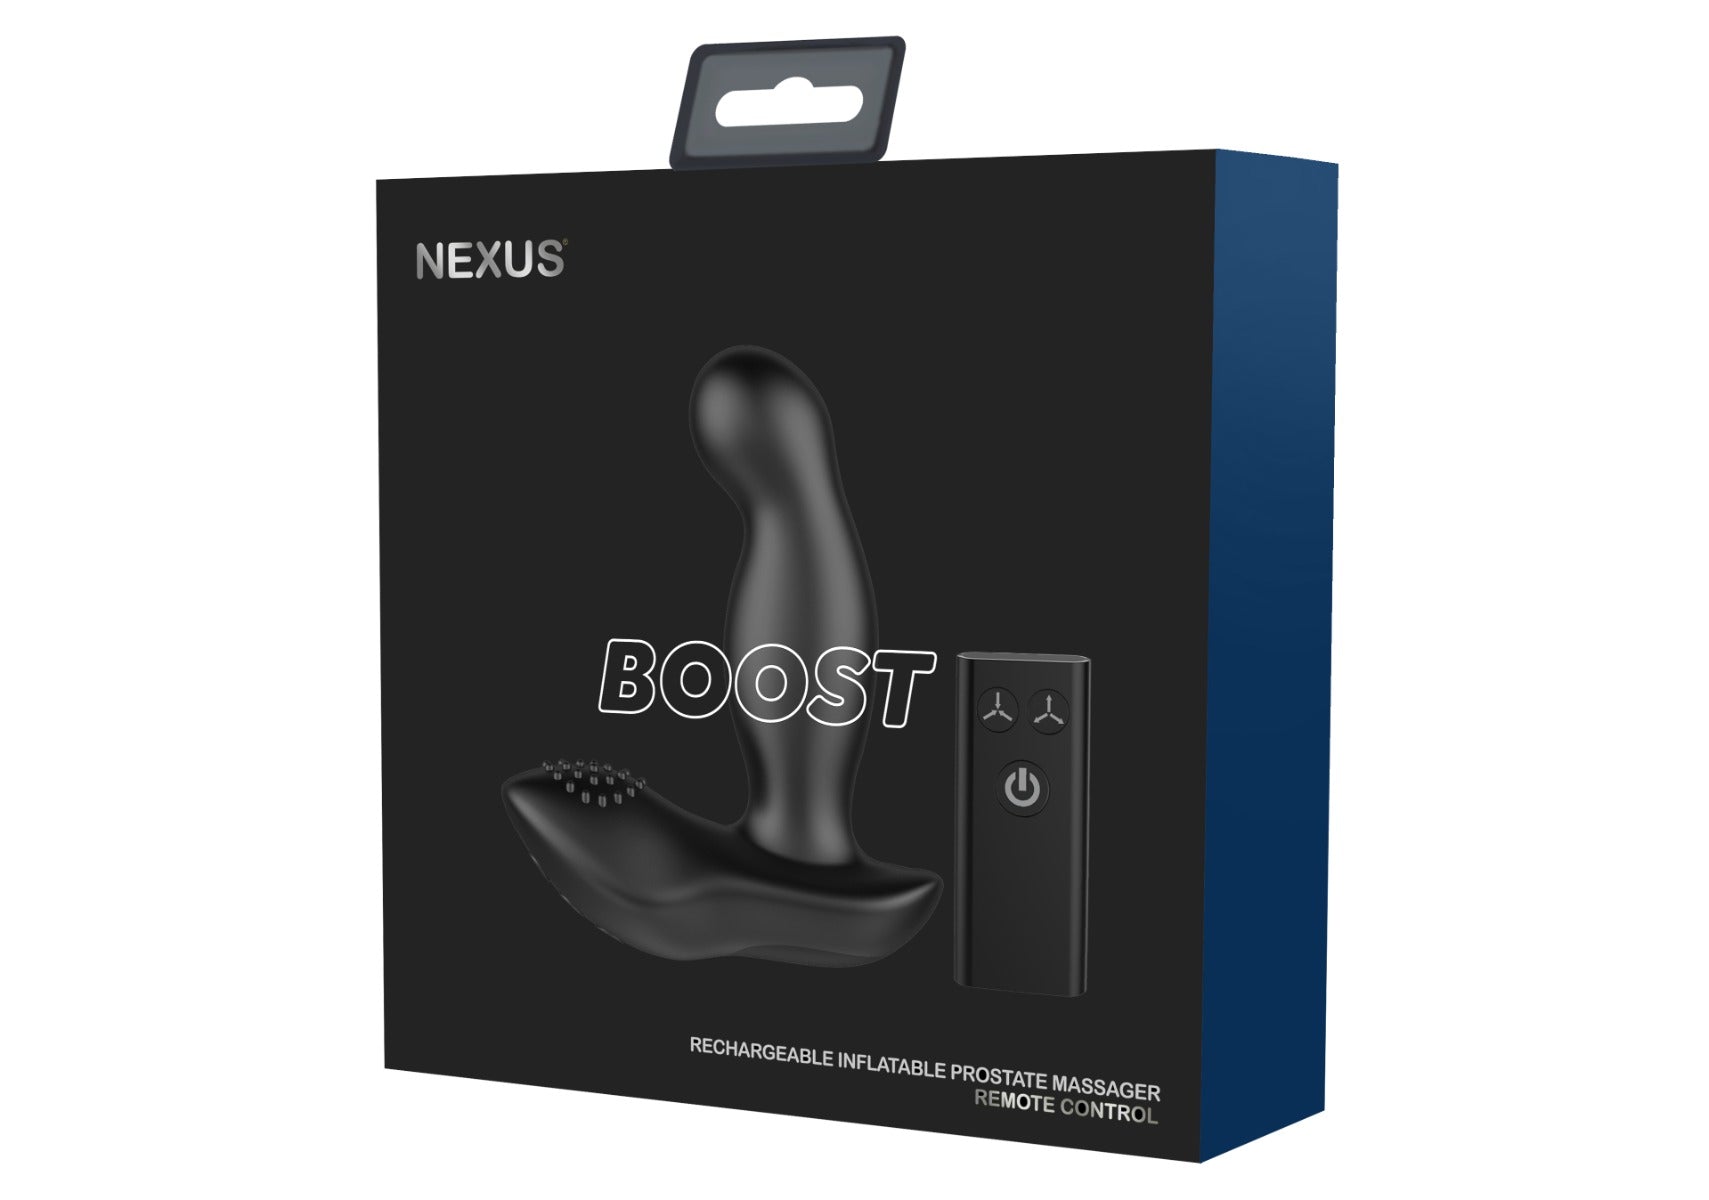 Nexus Boost Remote Control Prostate Massager Butt Plug with Inflatable Tip (8239671181551)